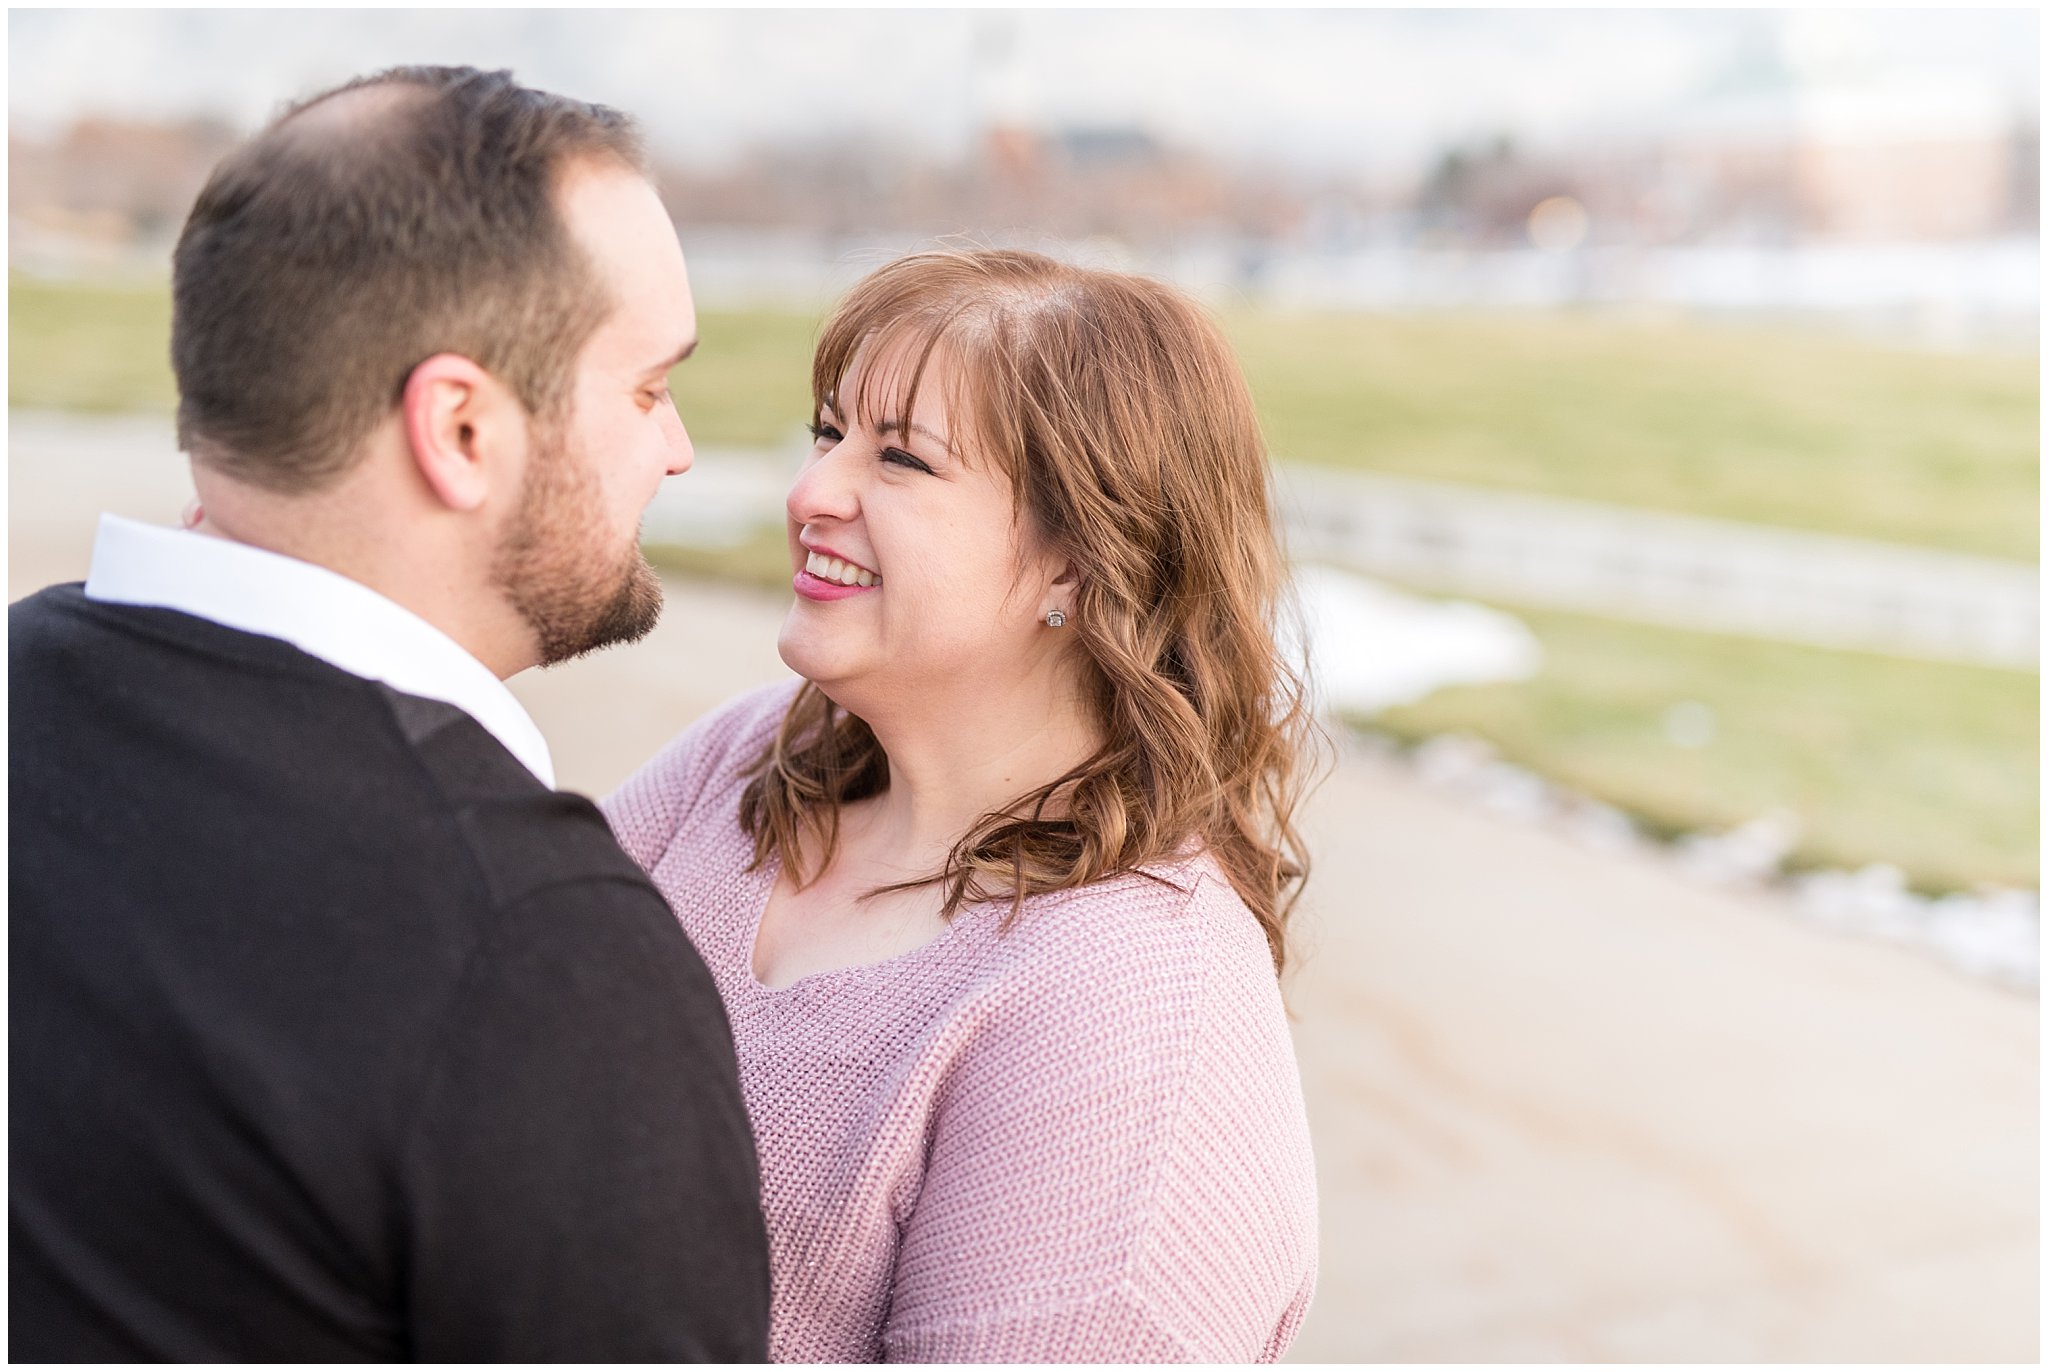 Couple smiling at each other on a path | Winter Engagement at Mueller Park and the Utah State Capitol | Jessie and Dallin Photography